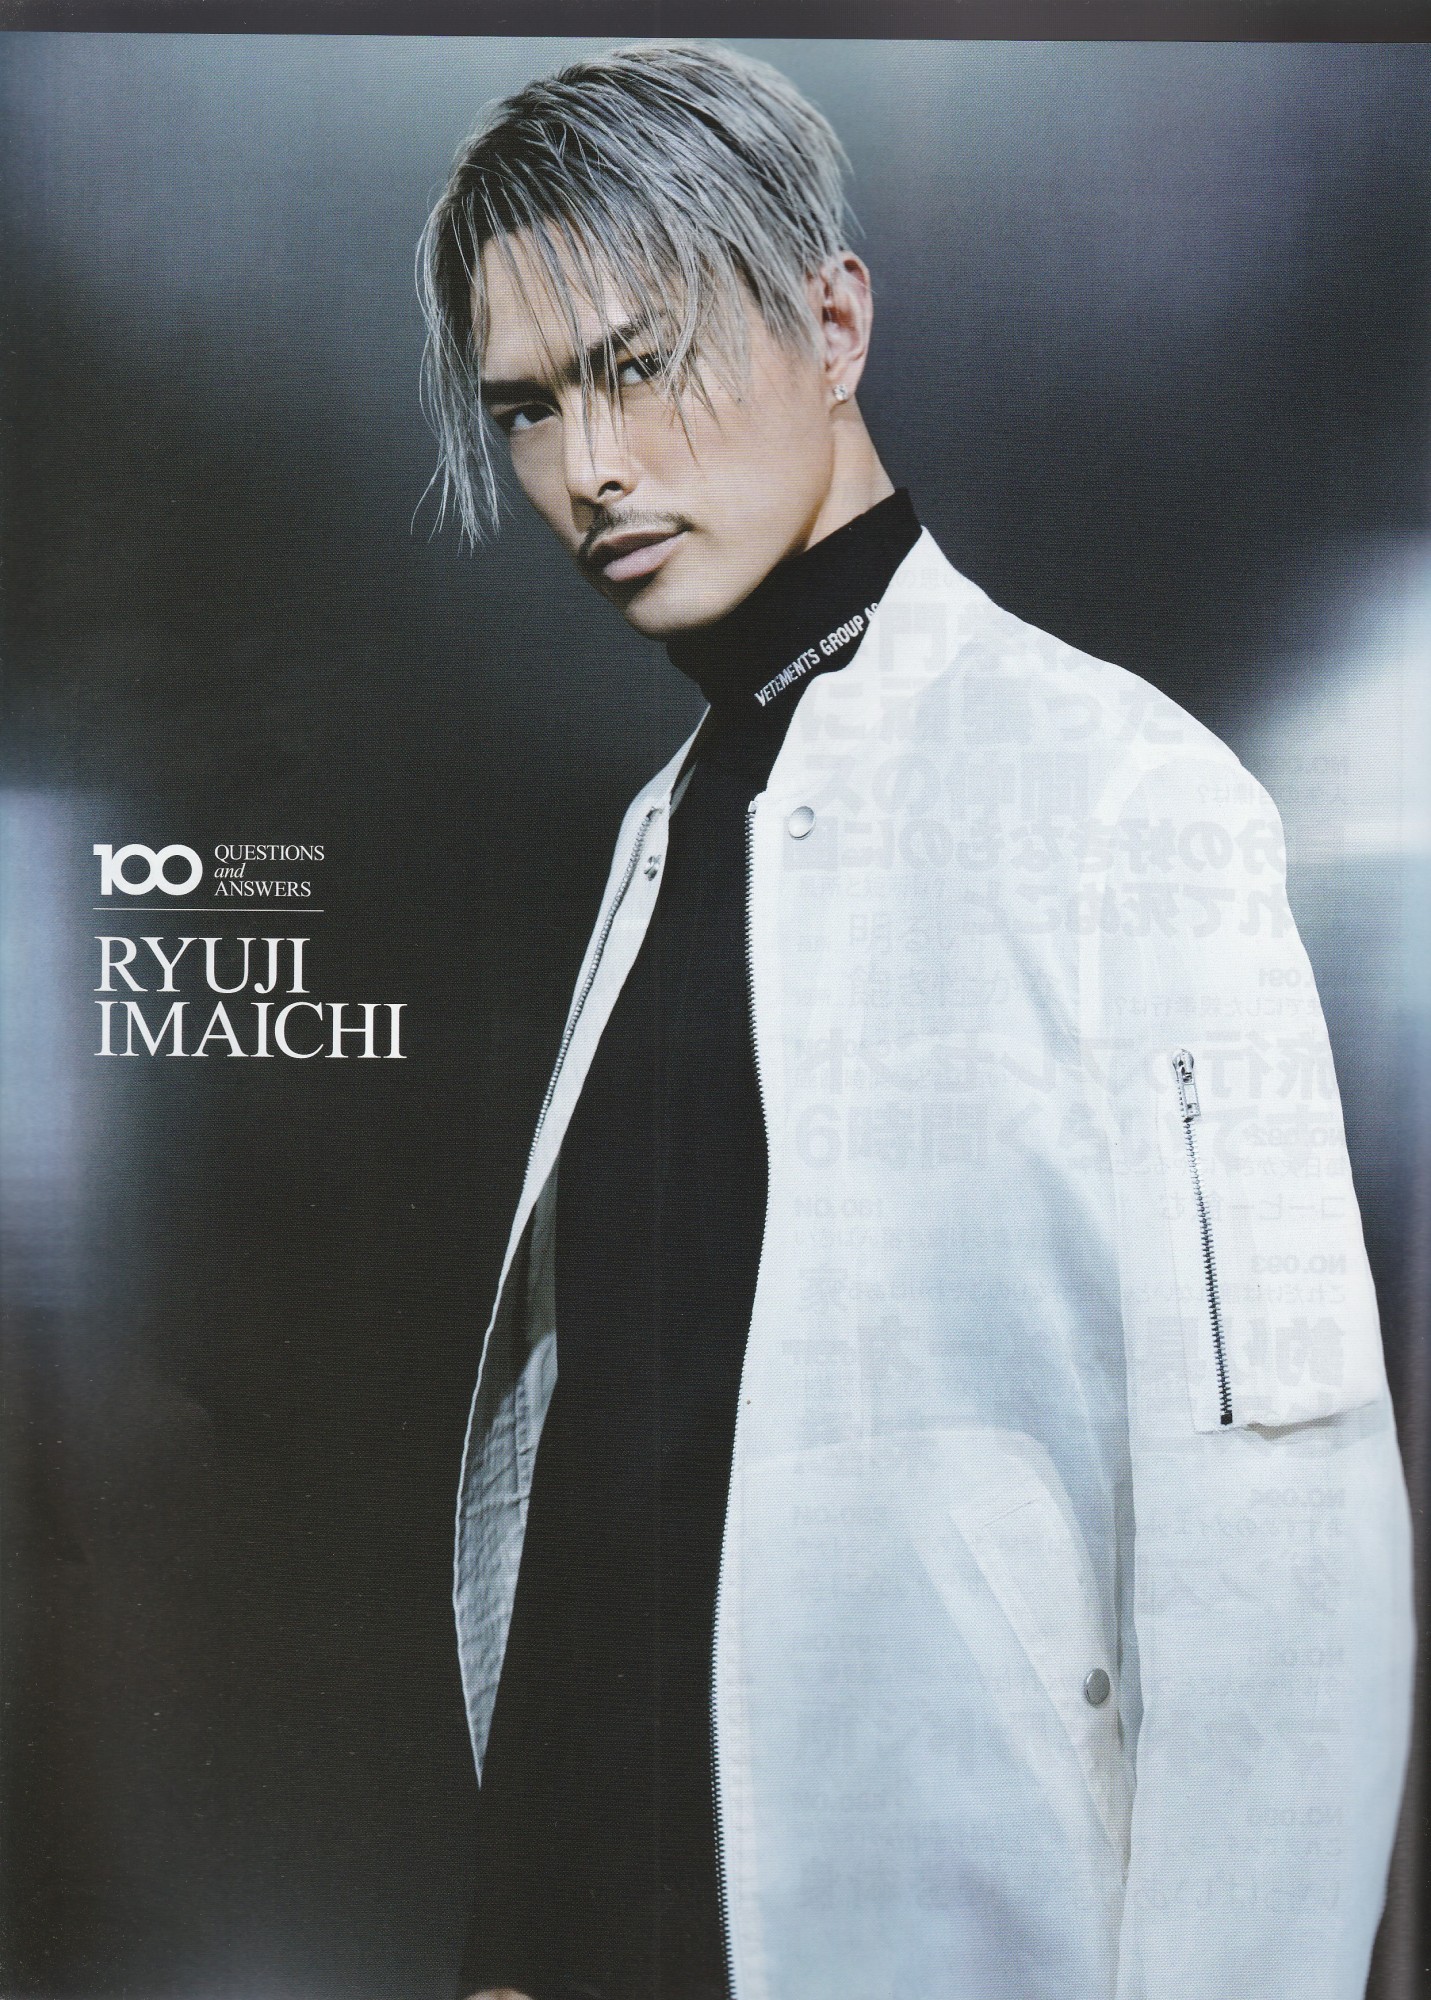 Ryuji Imaichi, He joined the group after winning, along tosaka hiroomi, the exile presents vocal